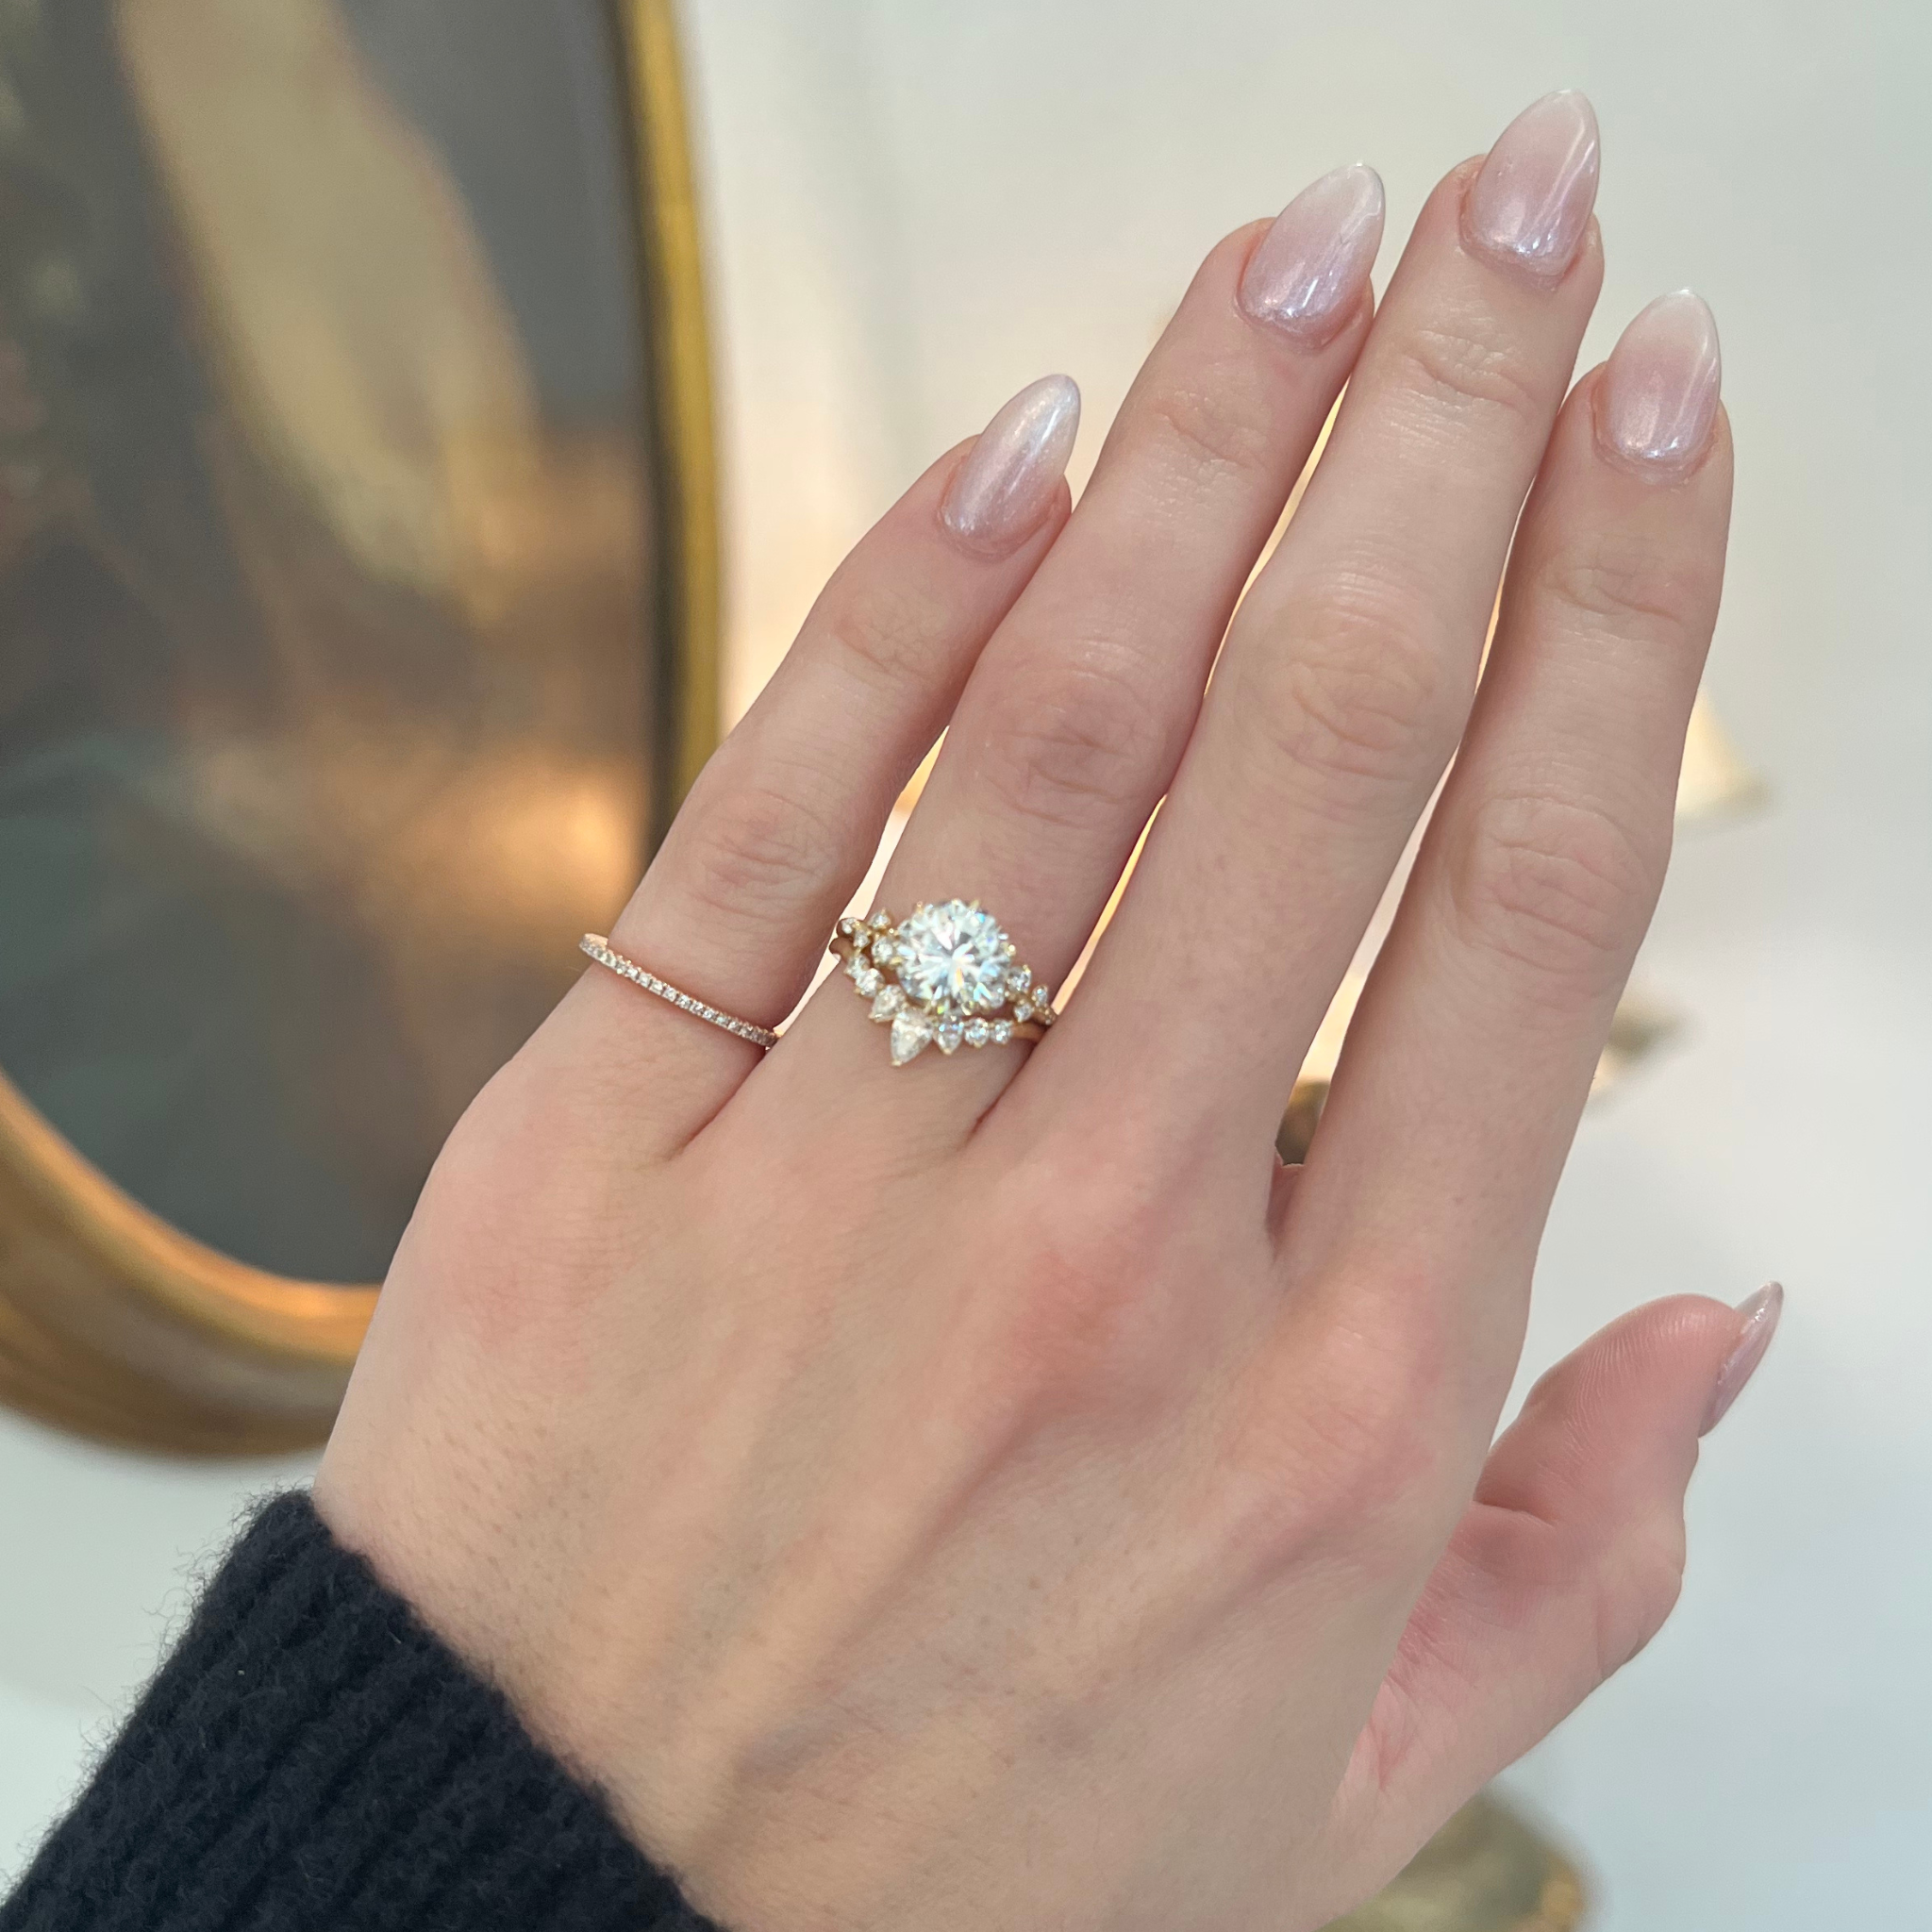 Designing Your Dream Engagement Ring: A Guide to Creating a Timeless Symbol of Love